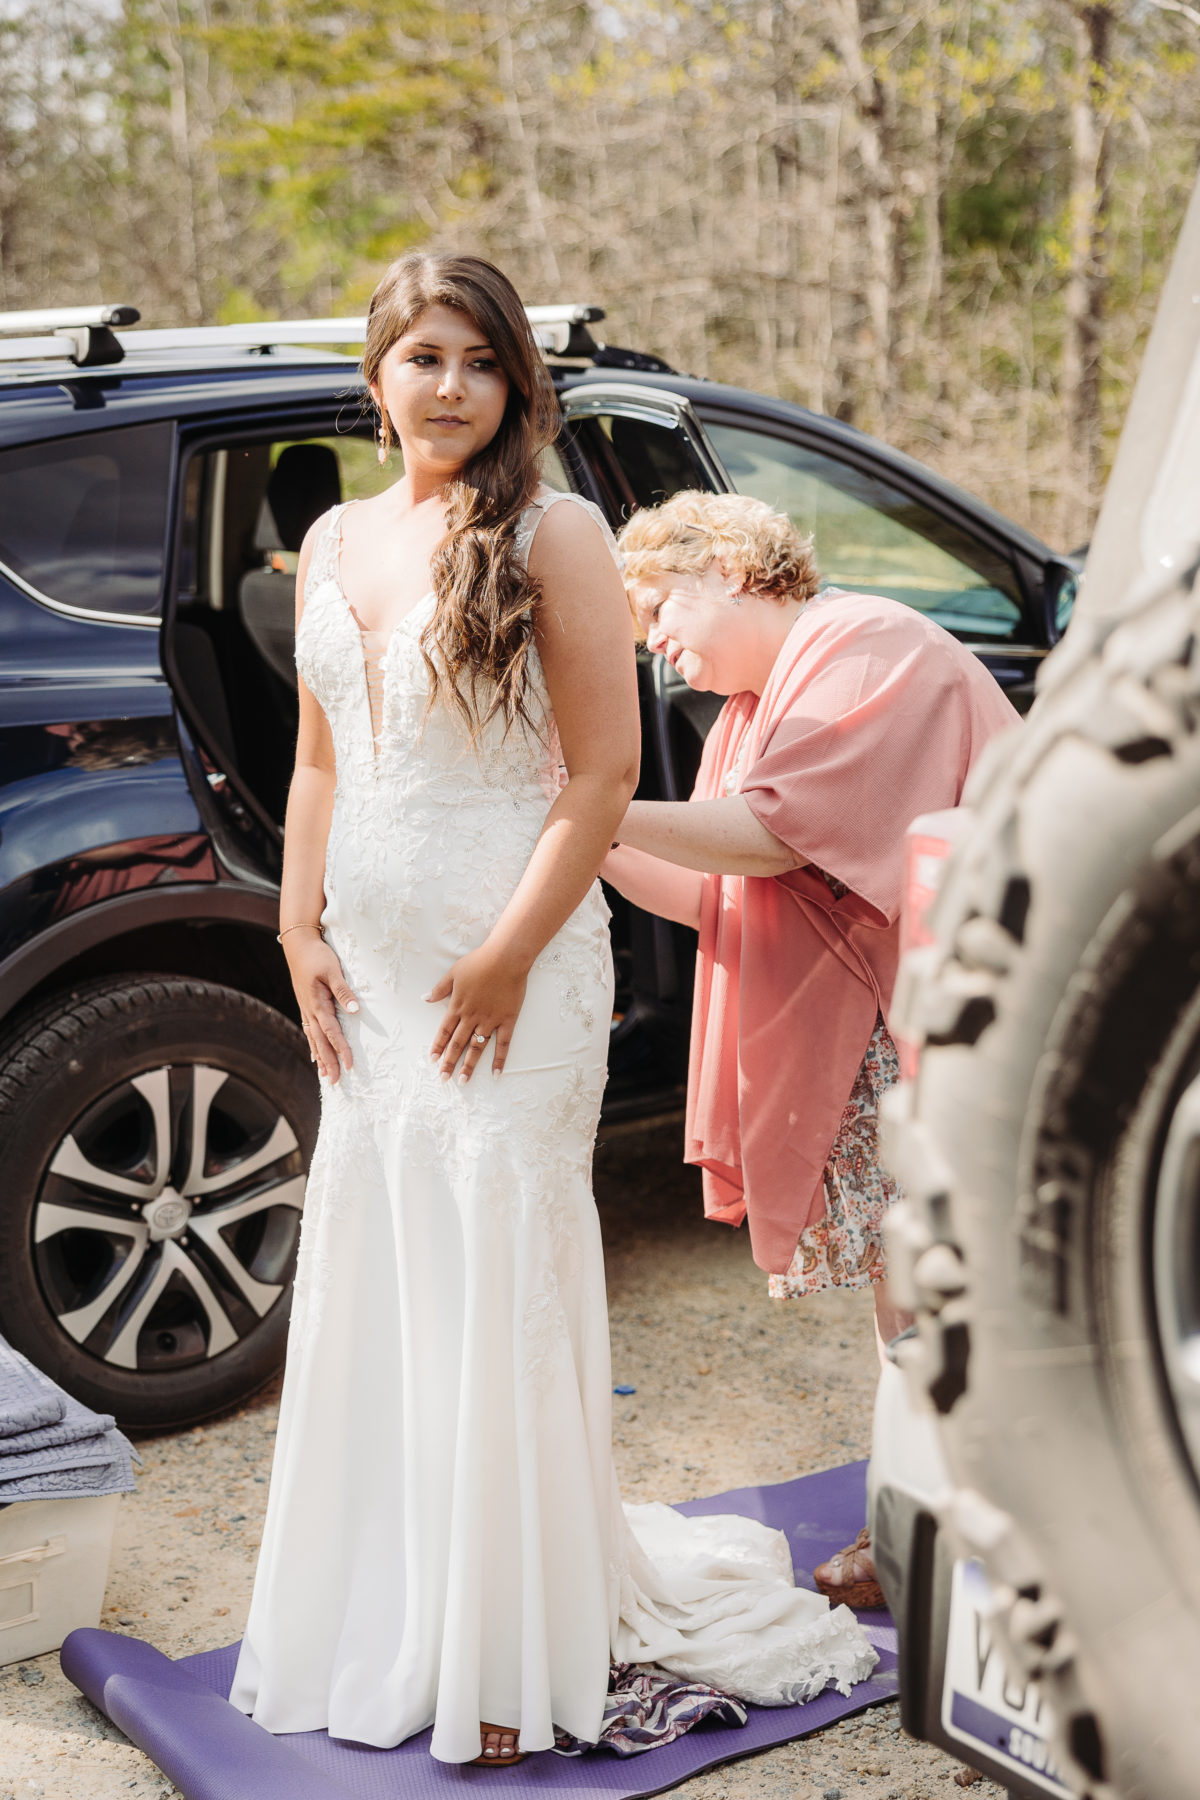 Mom Helps Bride Get Dressed In Parking Lot At Elopement ~ Elope Outdoors 